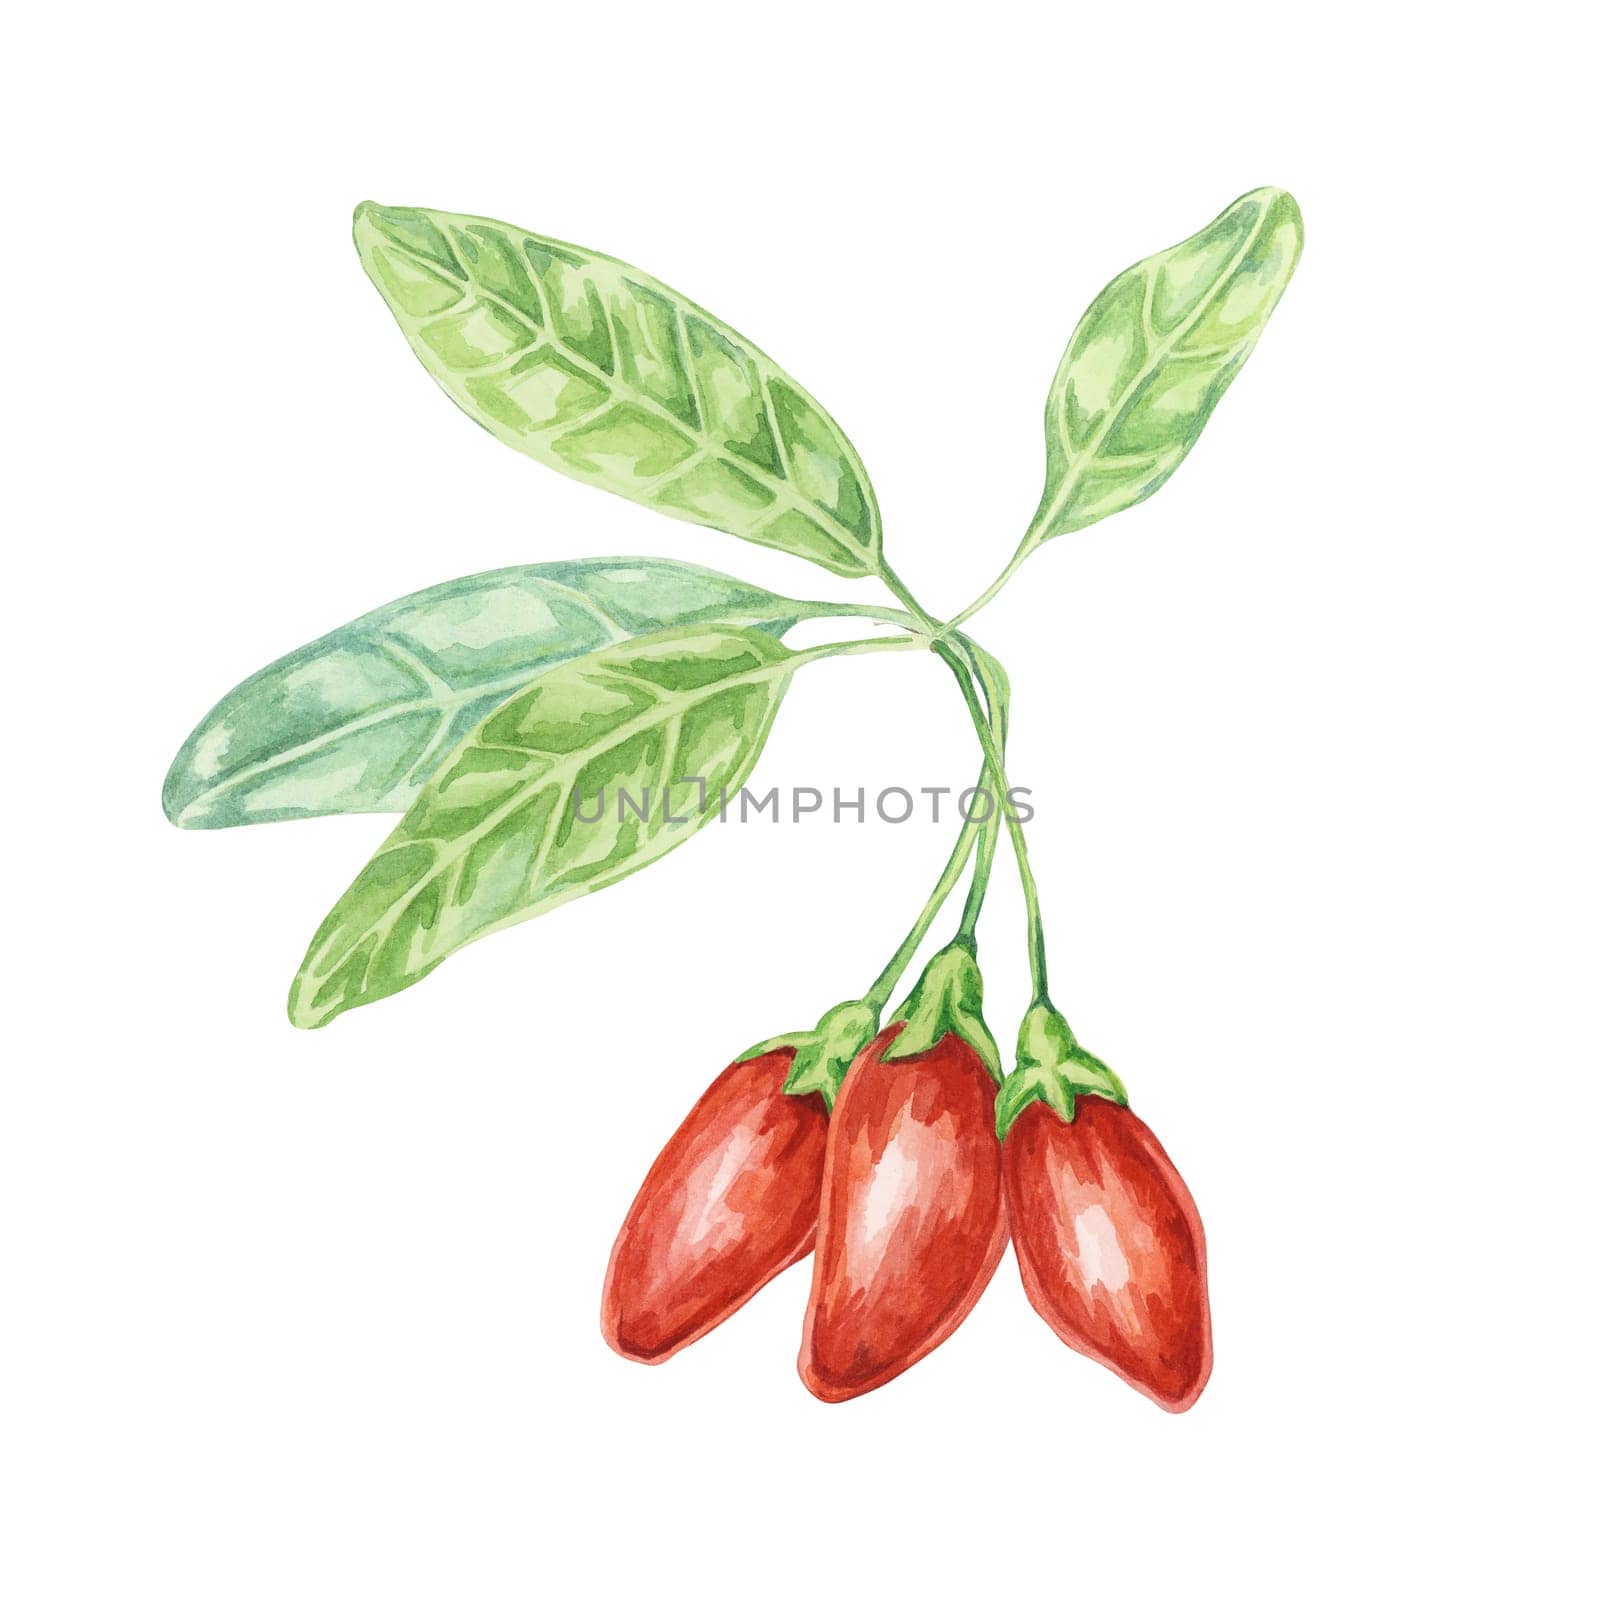 Goji berries on the branch with leaves in watercolor isolated on white background. Hand-drawn clipart of licium barbarum fruits, leaves. Design for printing, packaging, cards, posters